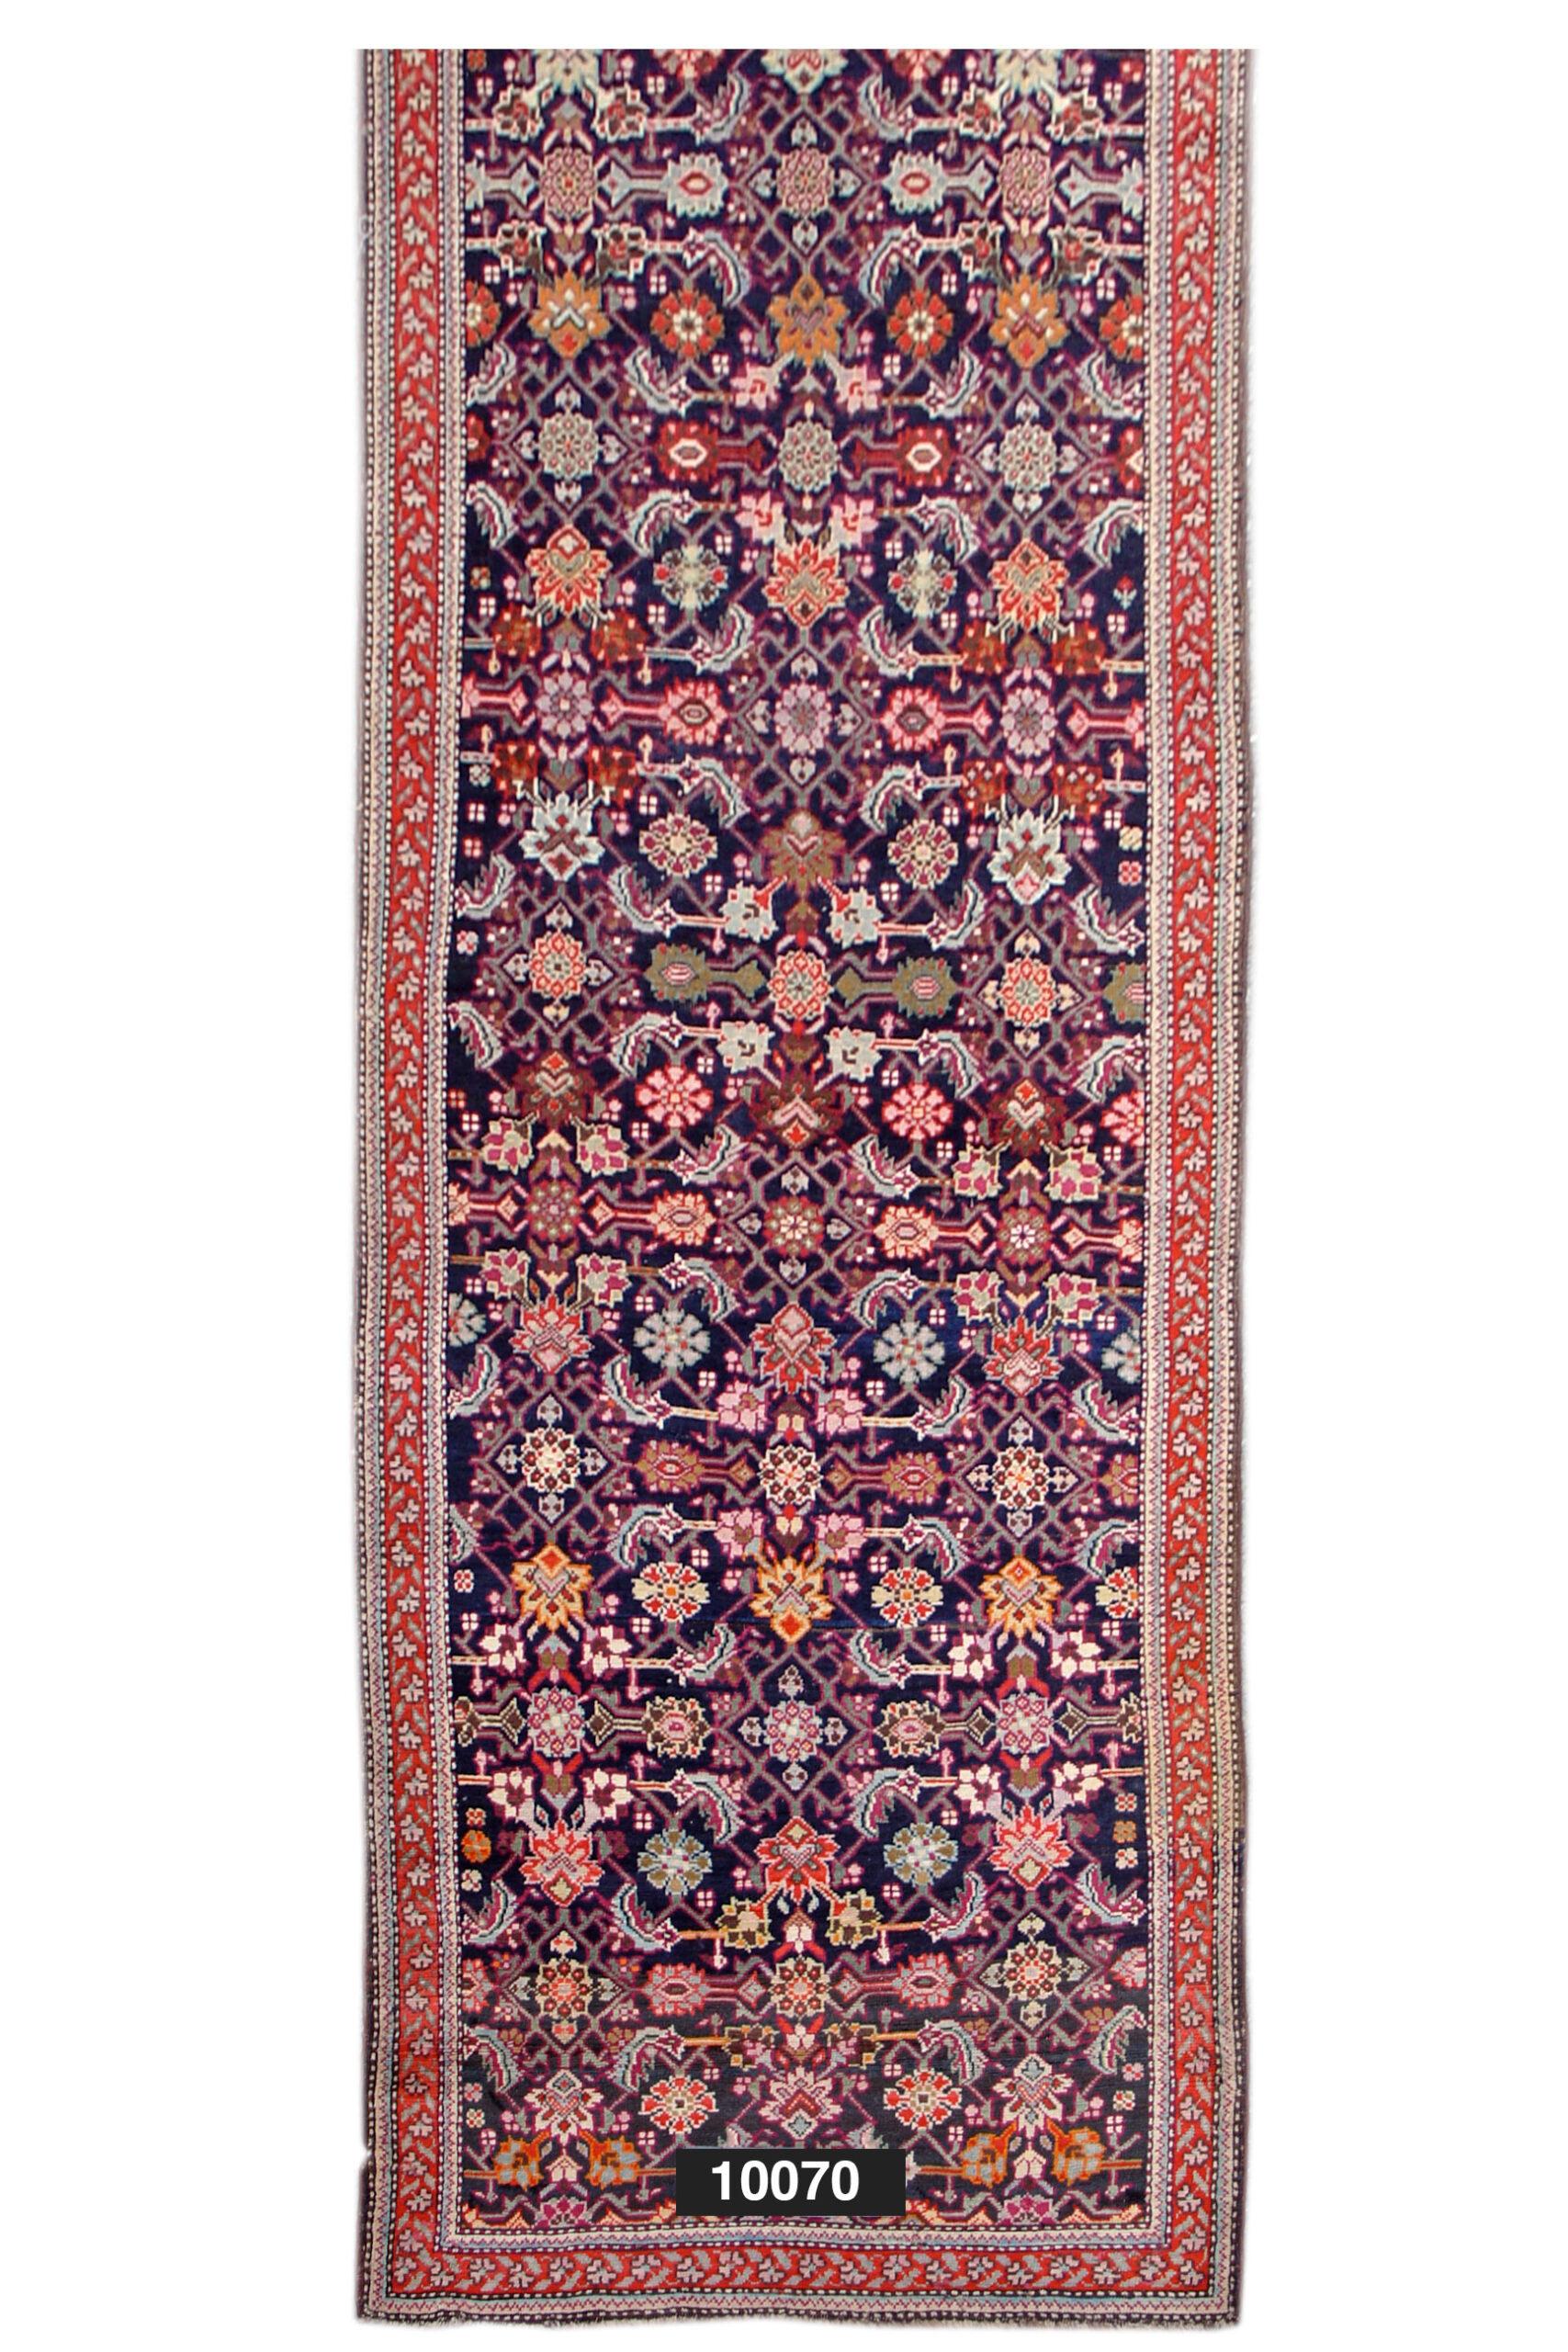 Antique Red Caucasian Karabagh Runner Rug, Early 20th Century 

Caucasian rug emulates the Persian 